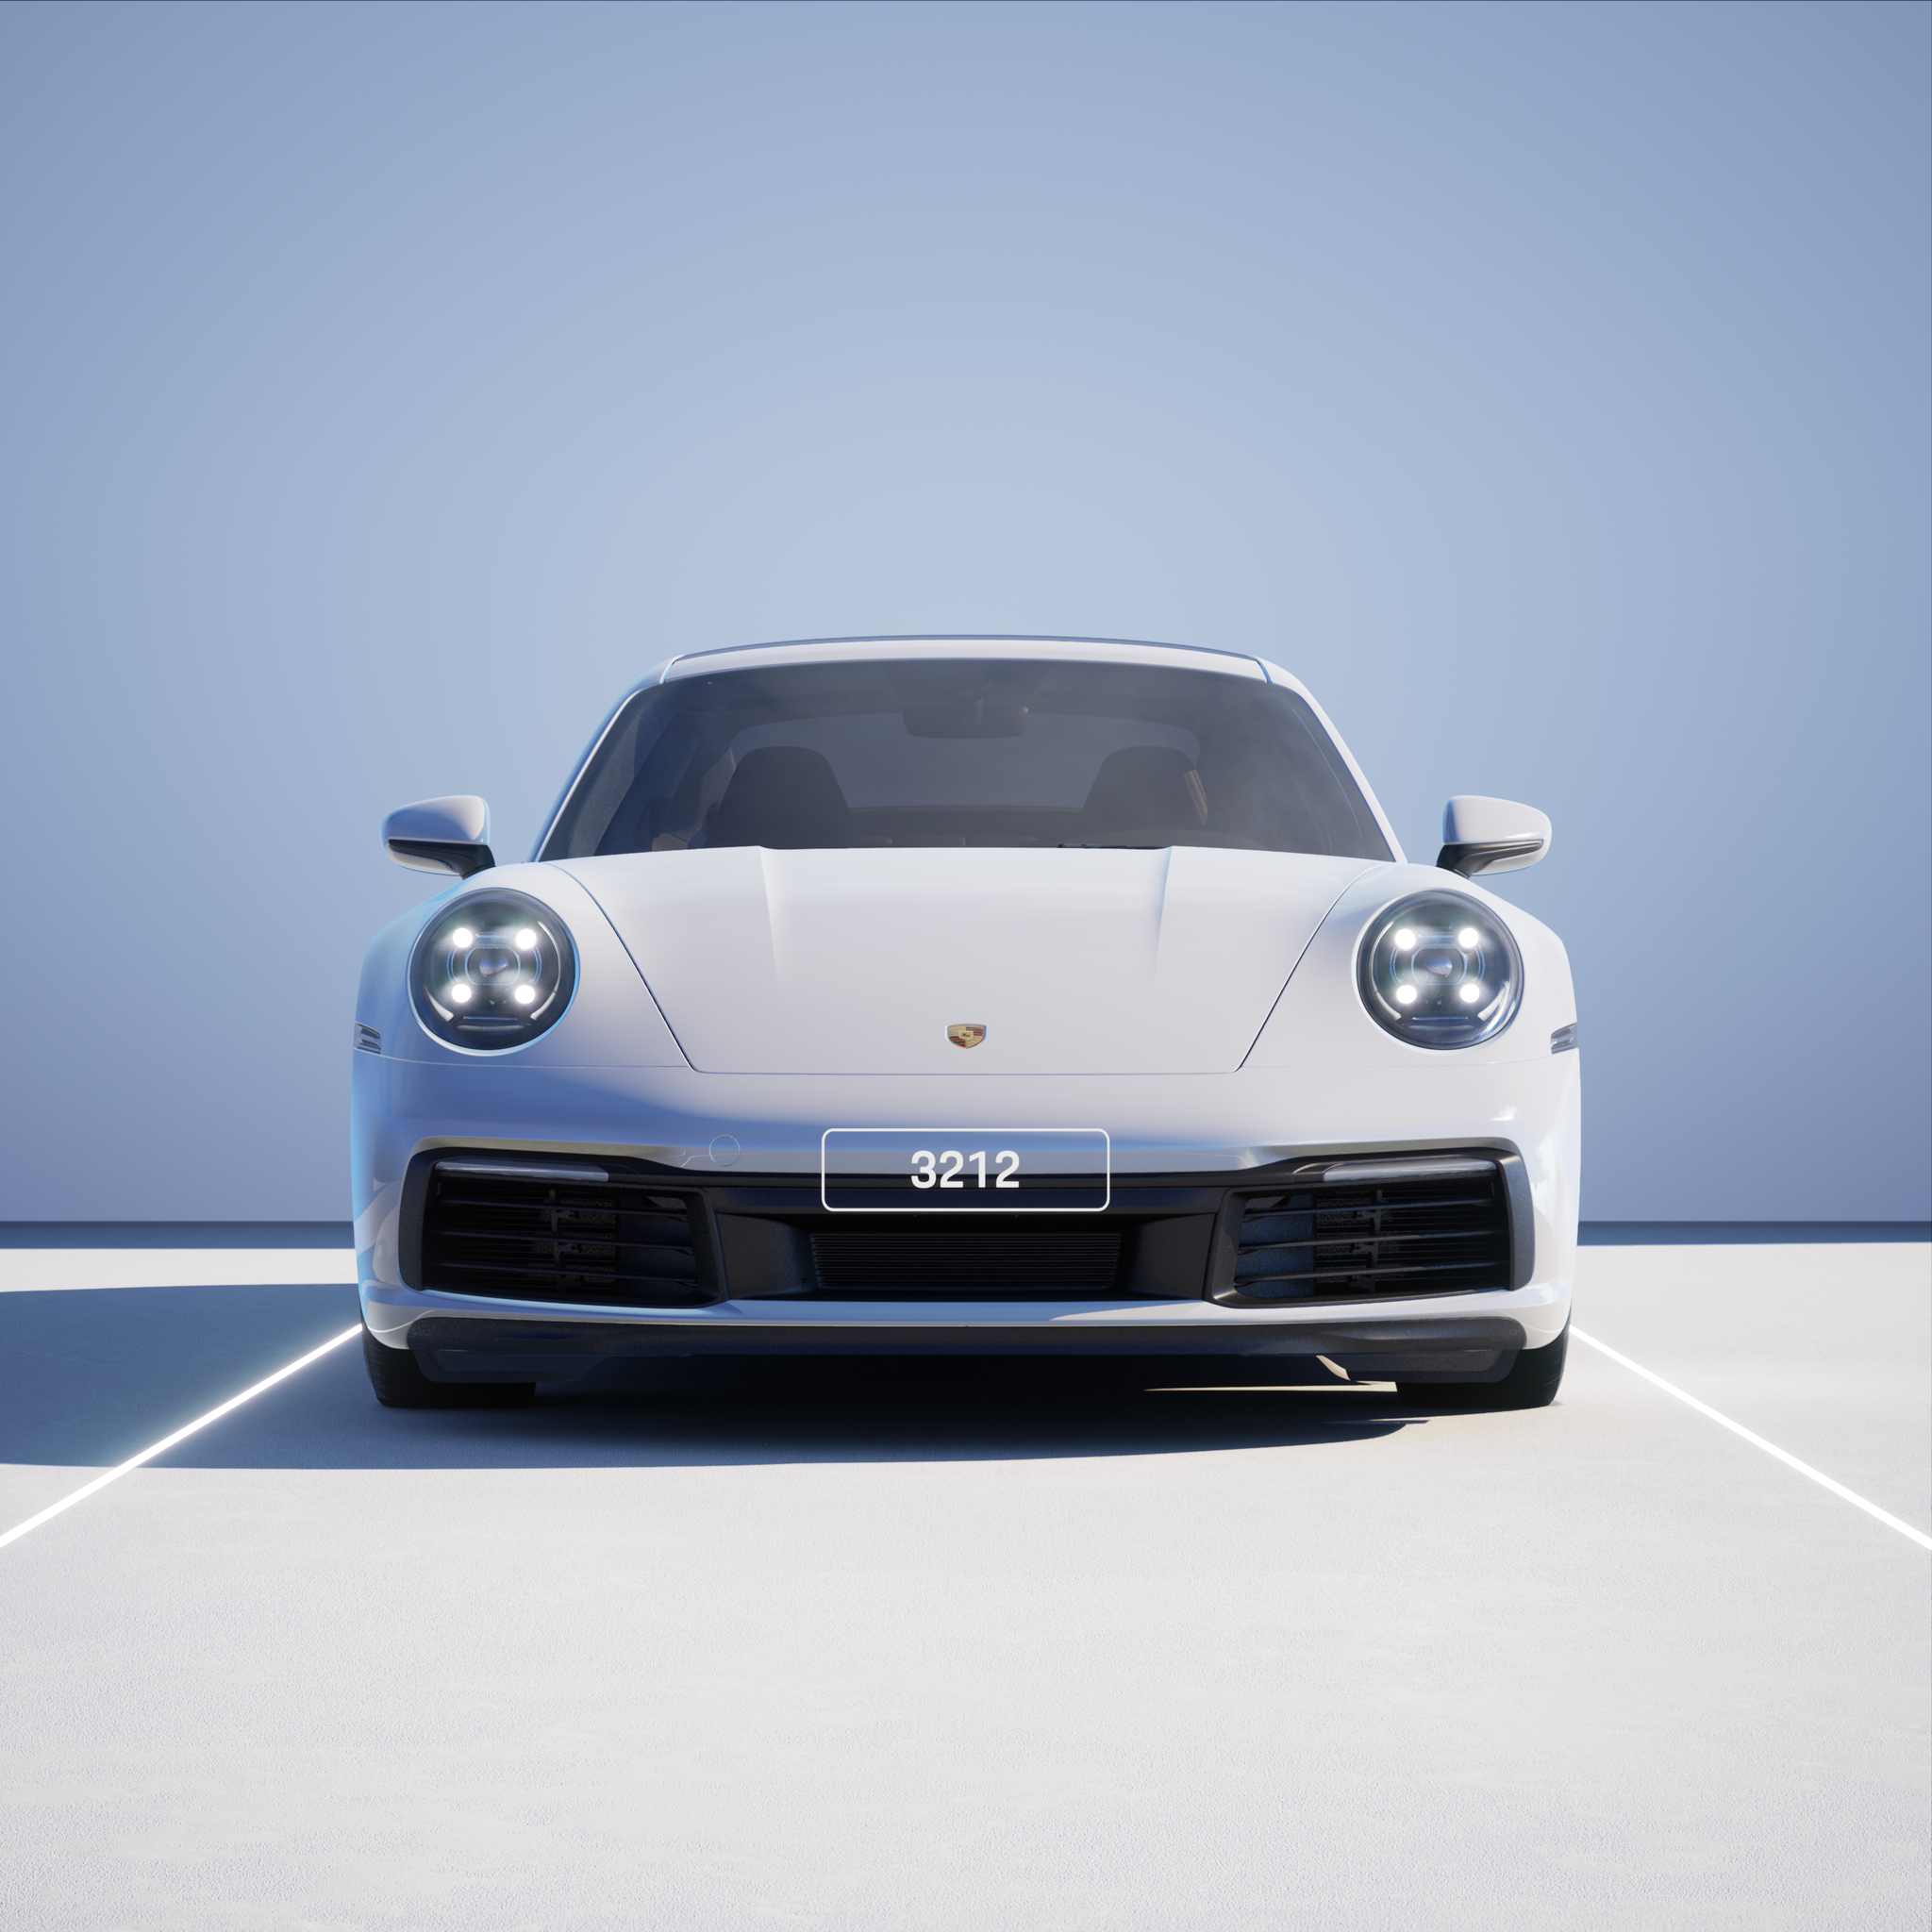 The PORSCHΞ 911 3212 image in phase